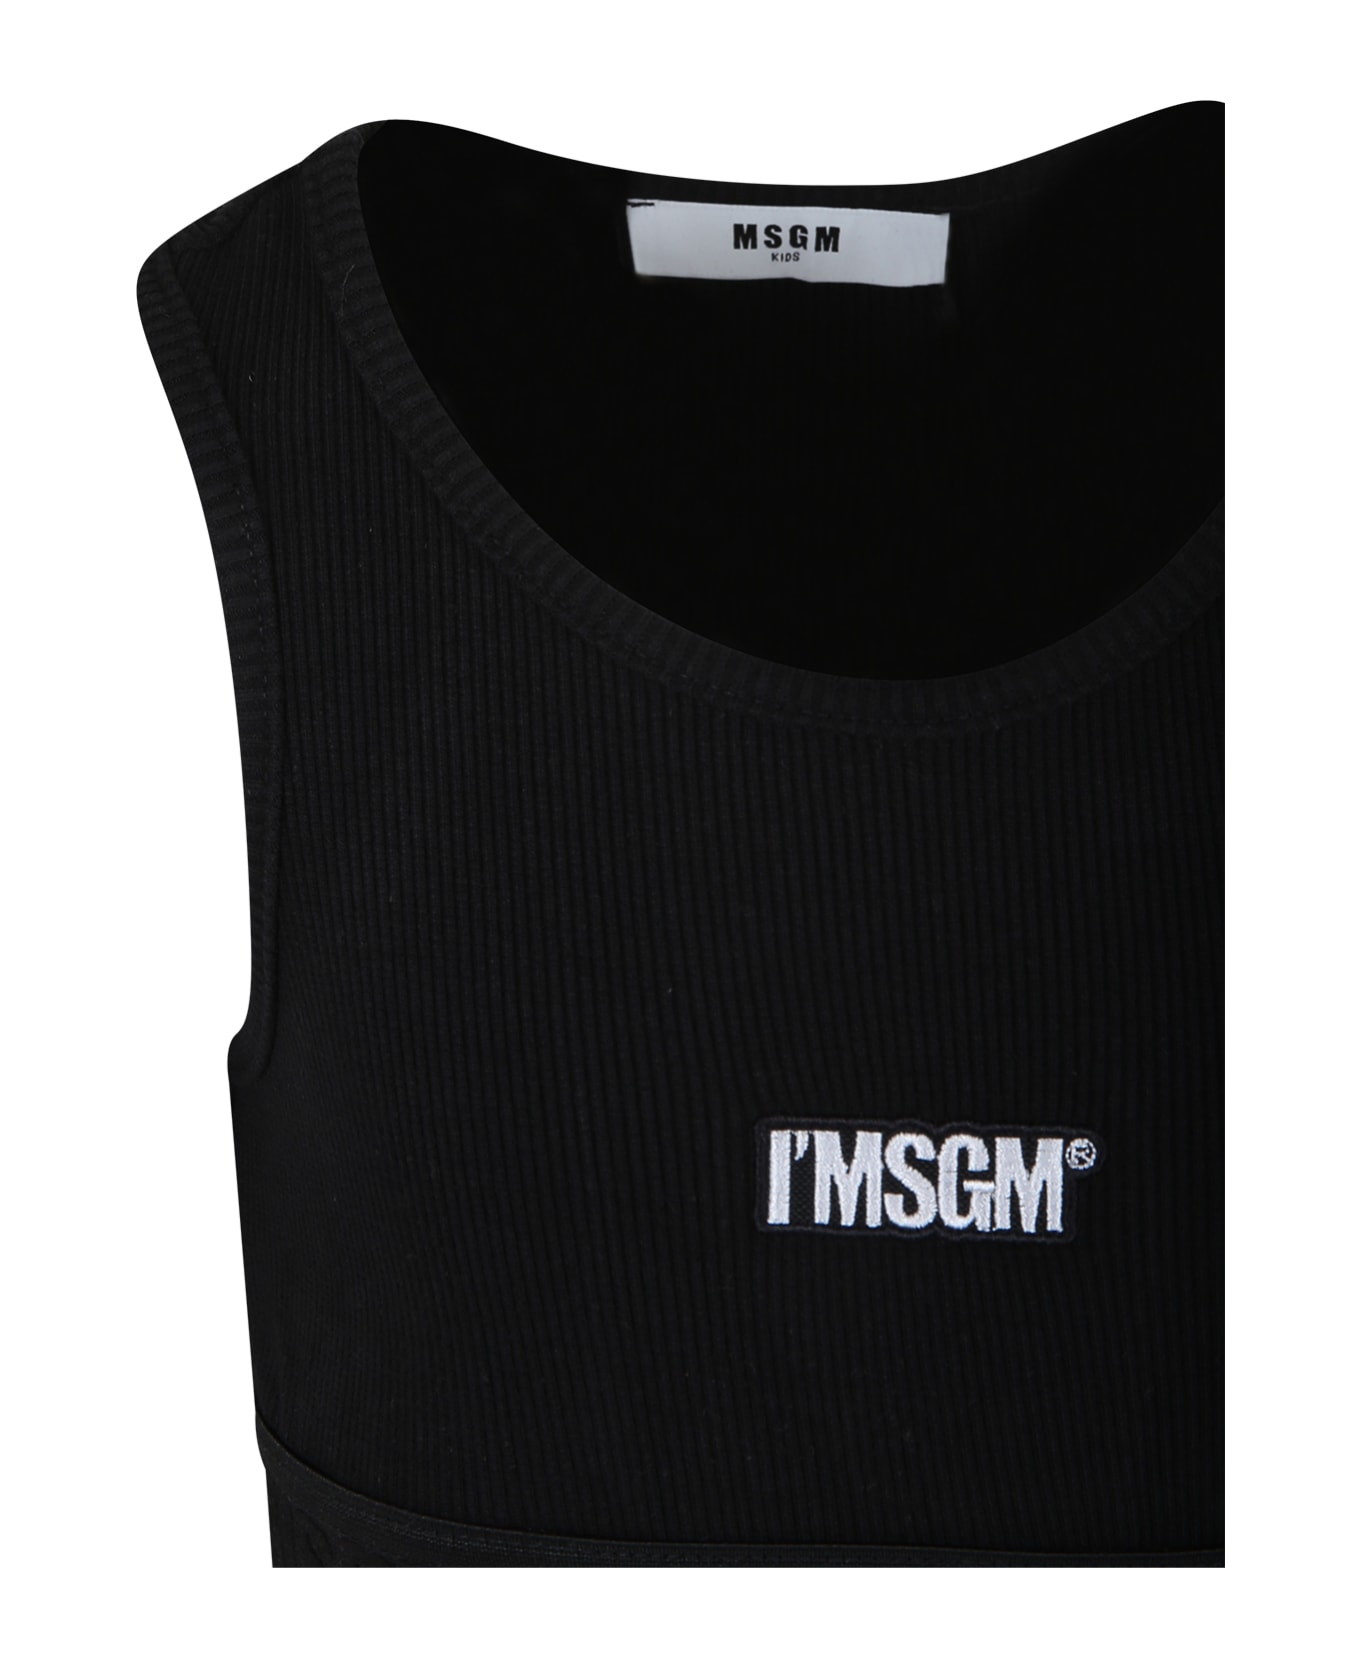 MSGM Black Crop Top For Girl With Logo - Black